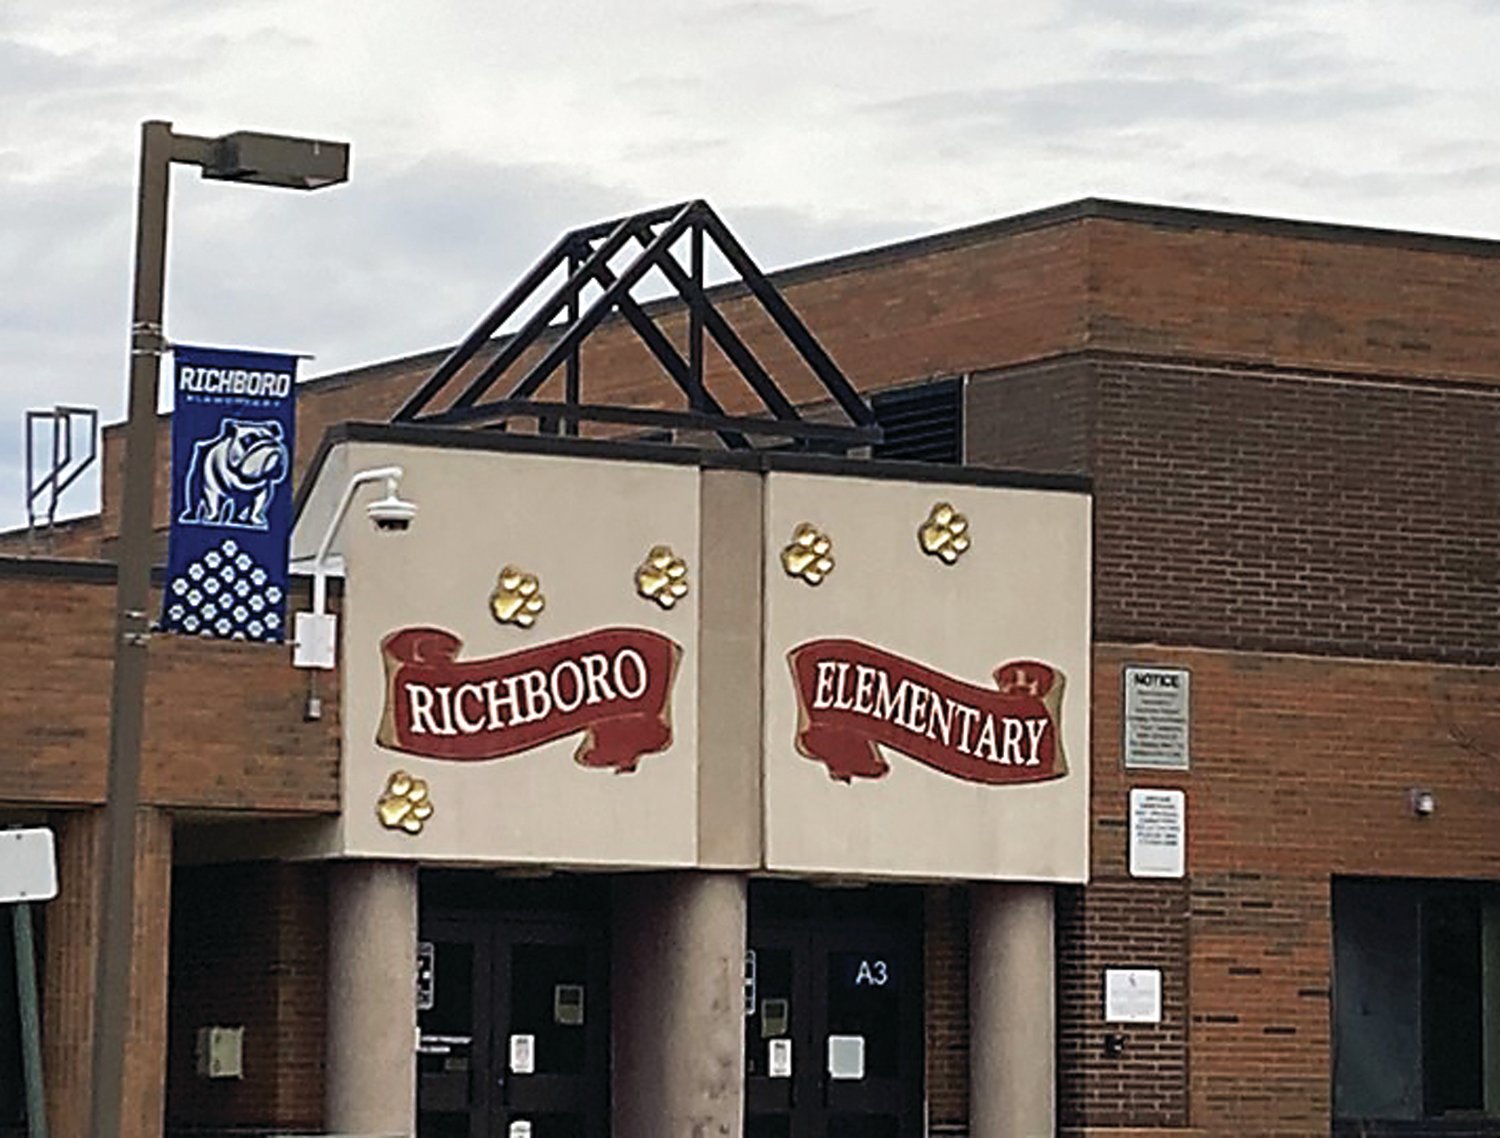 Council Rock School District officials plan to borrow money to finance an upcoming renovation-addition at Richboro Elementary School in Northampton.